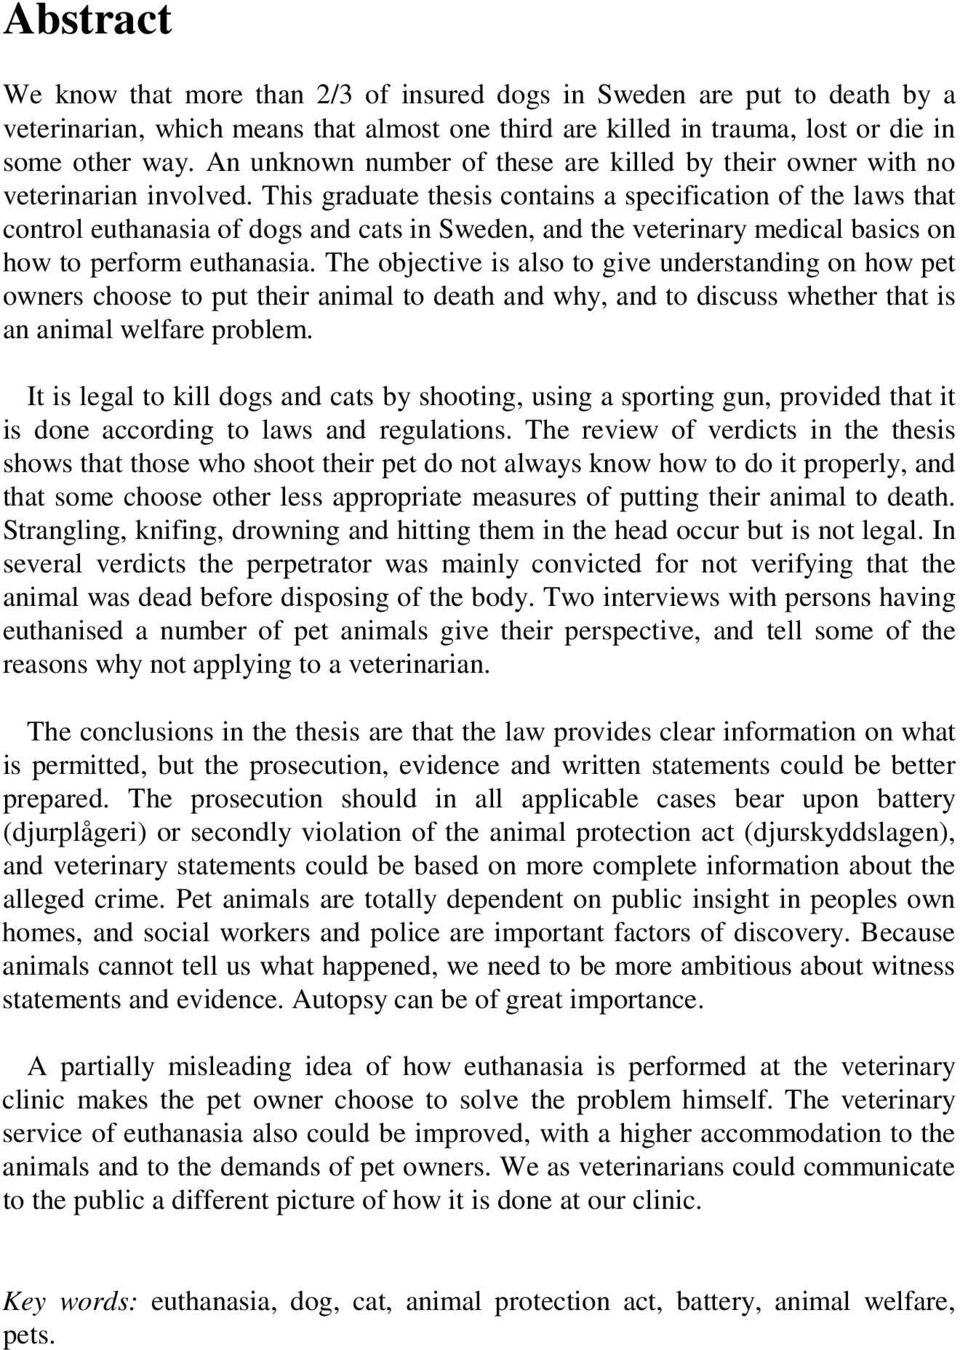 This graduate thesis contains a specification of the laws that control euthanasia of dogs and cats in Sweden, and the veterinary medical basics on how to perform euthanasia.